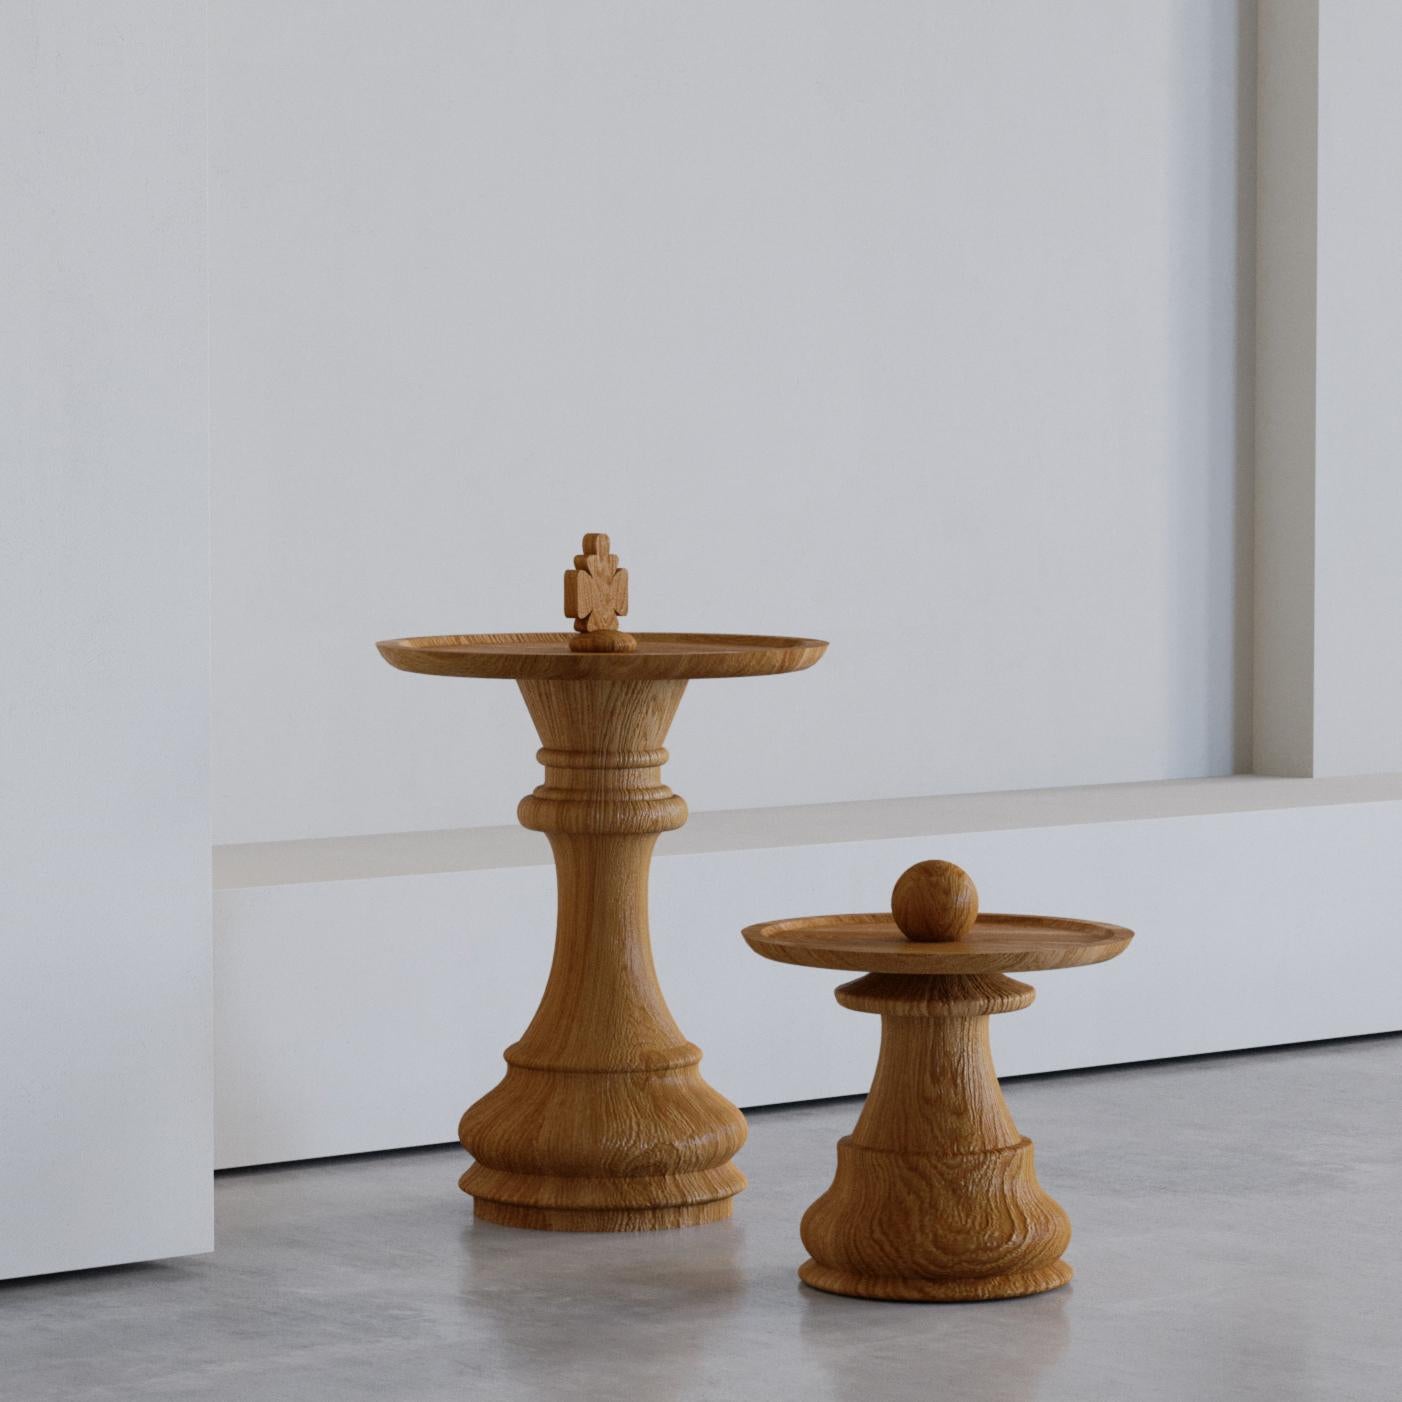 Derived from the classical forms of chess pieces,Sah sidetable bring innovation to your space with their sculptural and unique presence. These pedestals represent an unconventional approach to furniture design and add a distinctive character to your